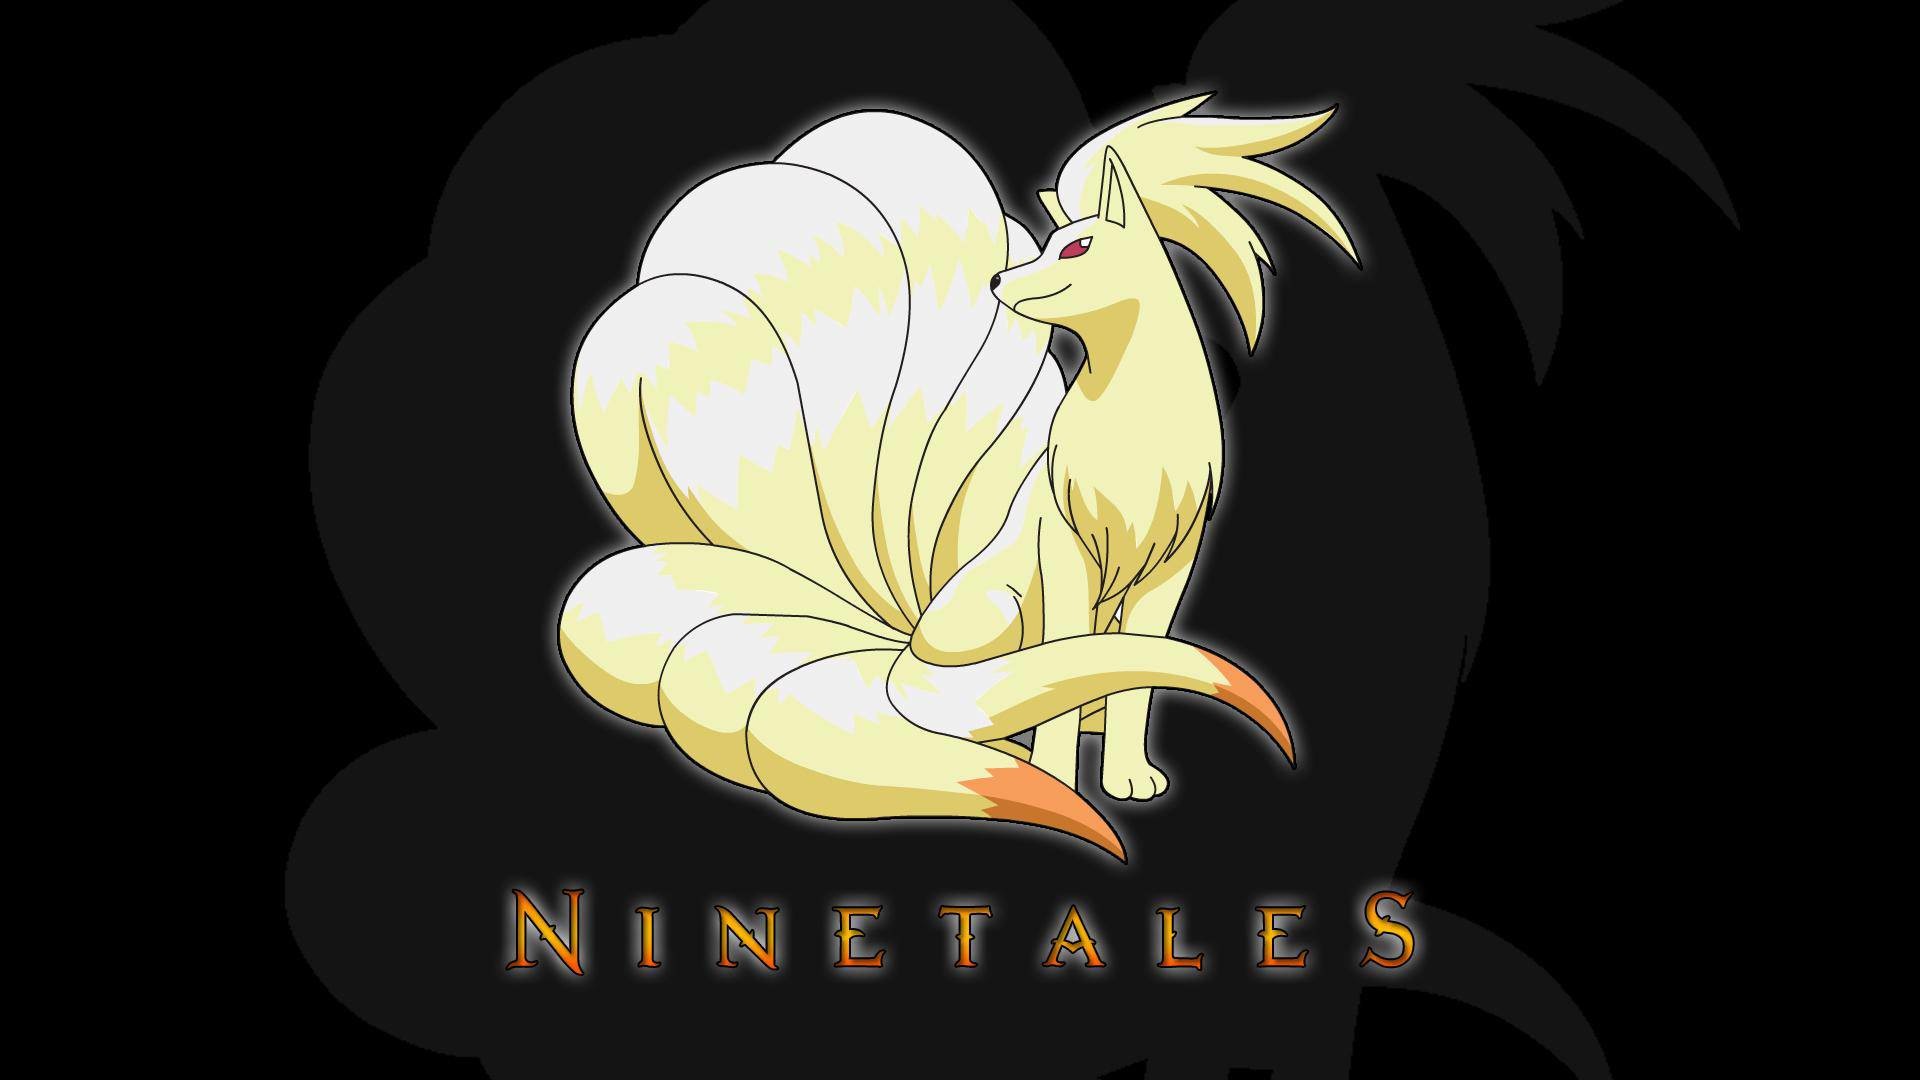 Ninetails thats what needed wallpaper – – High Quality